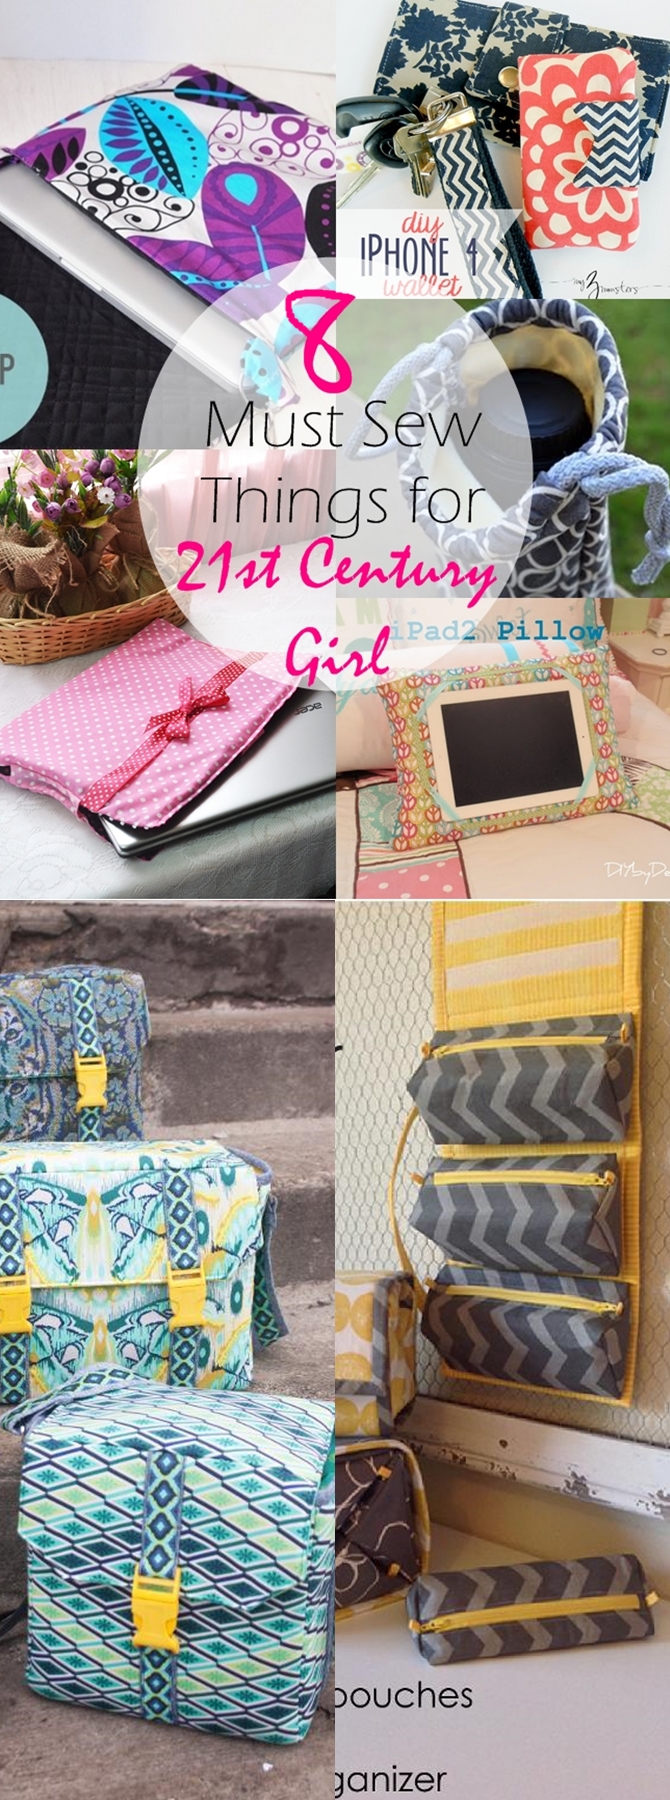 8 Must Sew Things for 21st Century Girl | things to sew for girls | fabric gifts to sew | things to sew for teens | teen girls sewing projects